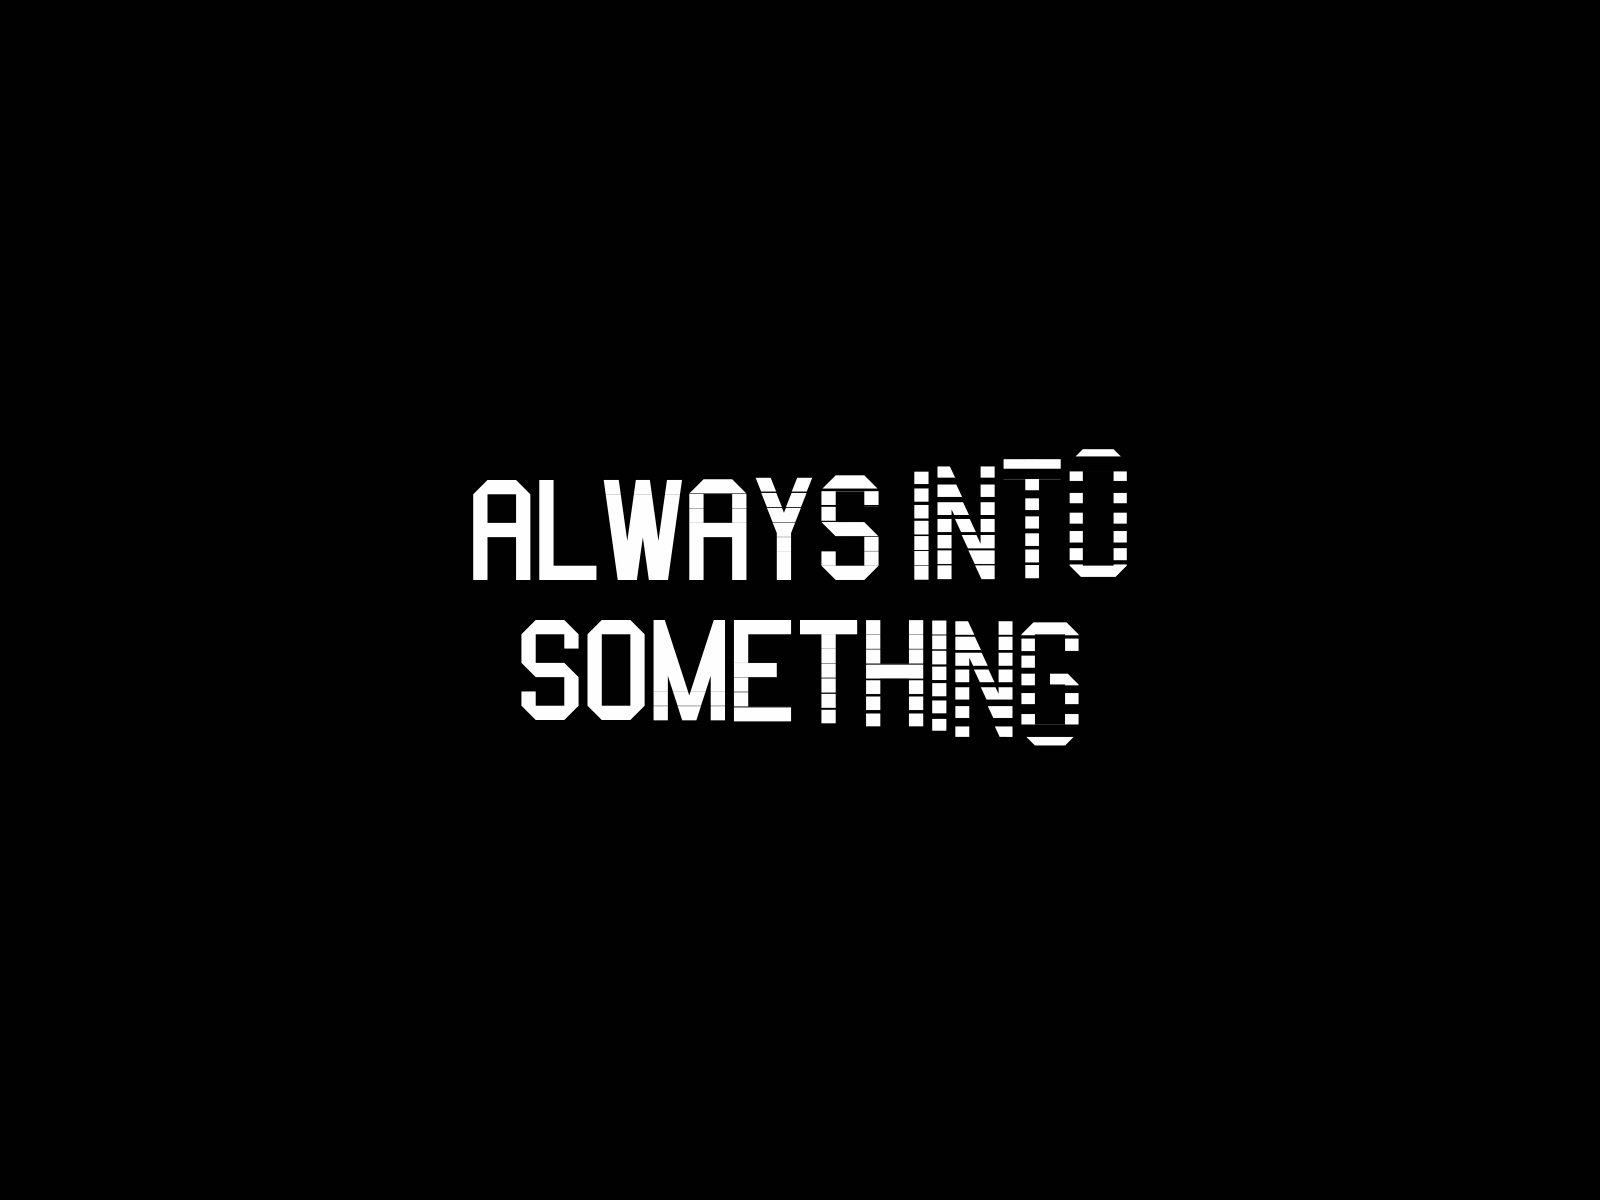 Always Into Something by Animography on Dribbble